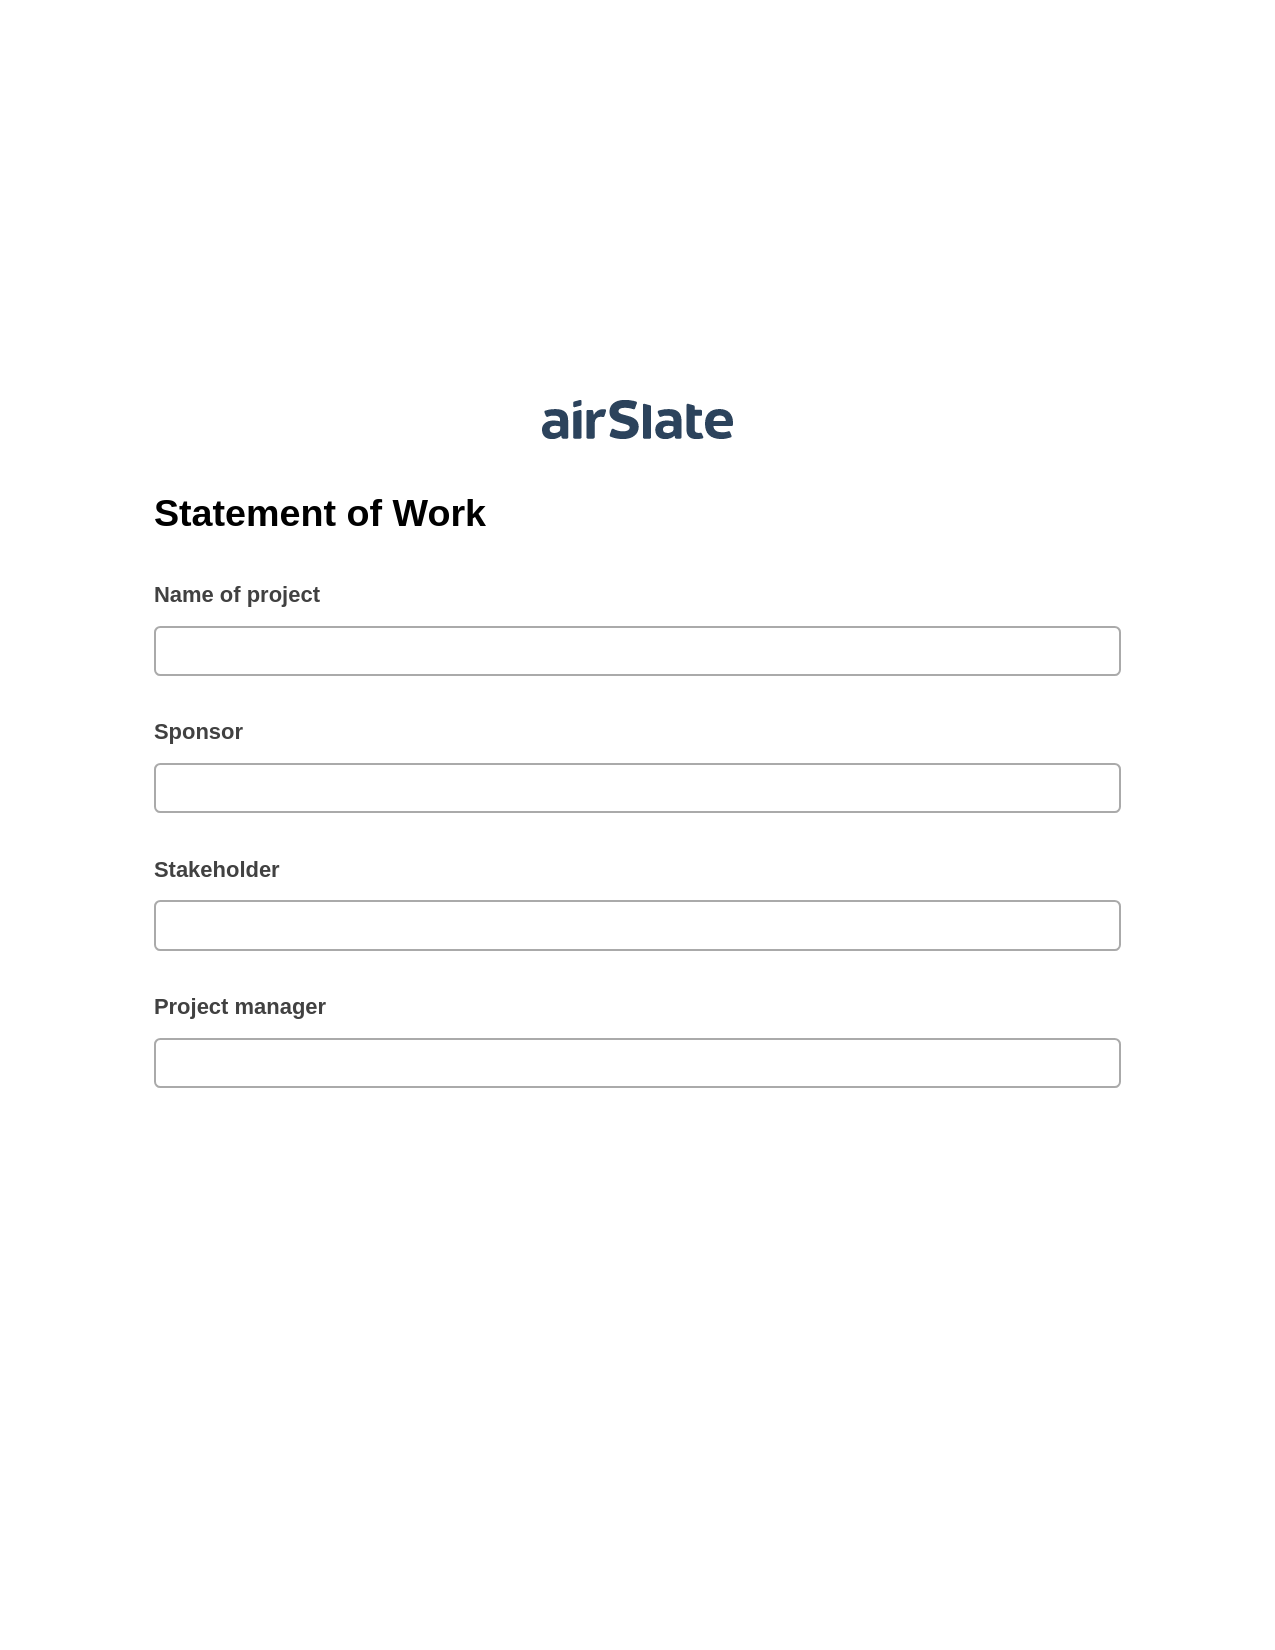 Multirole Statement of Work Pre-fill Dropdowns from Office 365 Excel Bot, Send Slate to MS Dynamics 365 Contact DEPRECATED, Archive to SharePoint Folder Bot